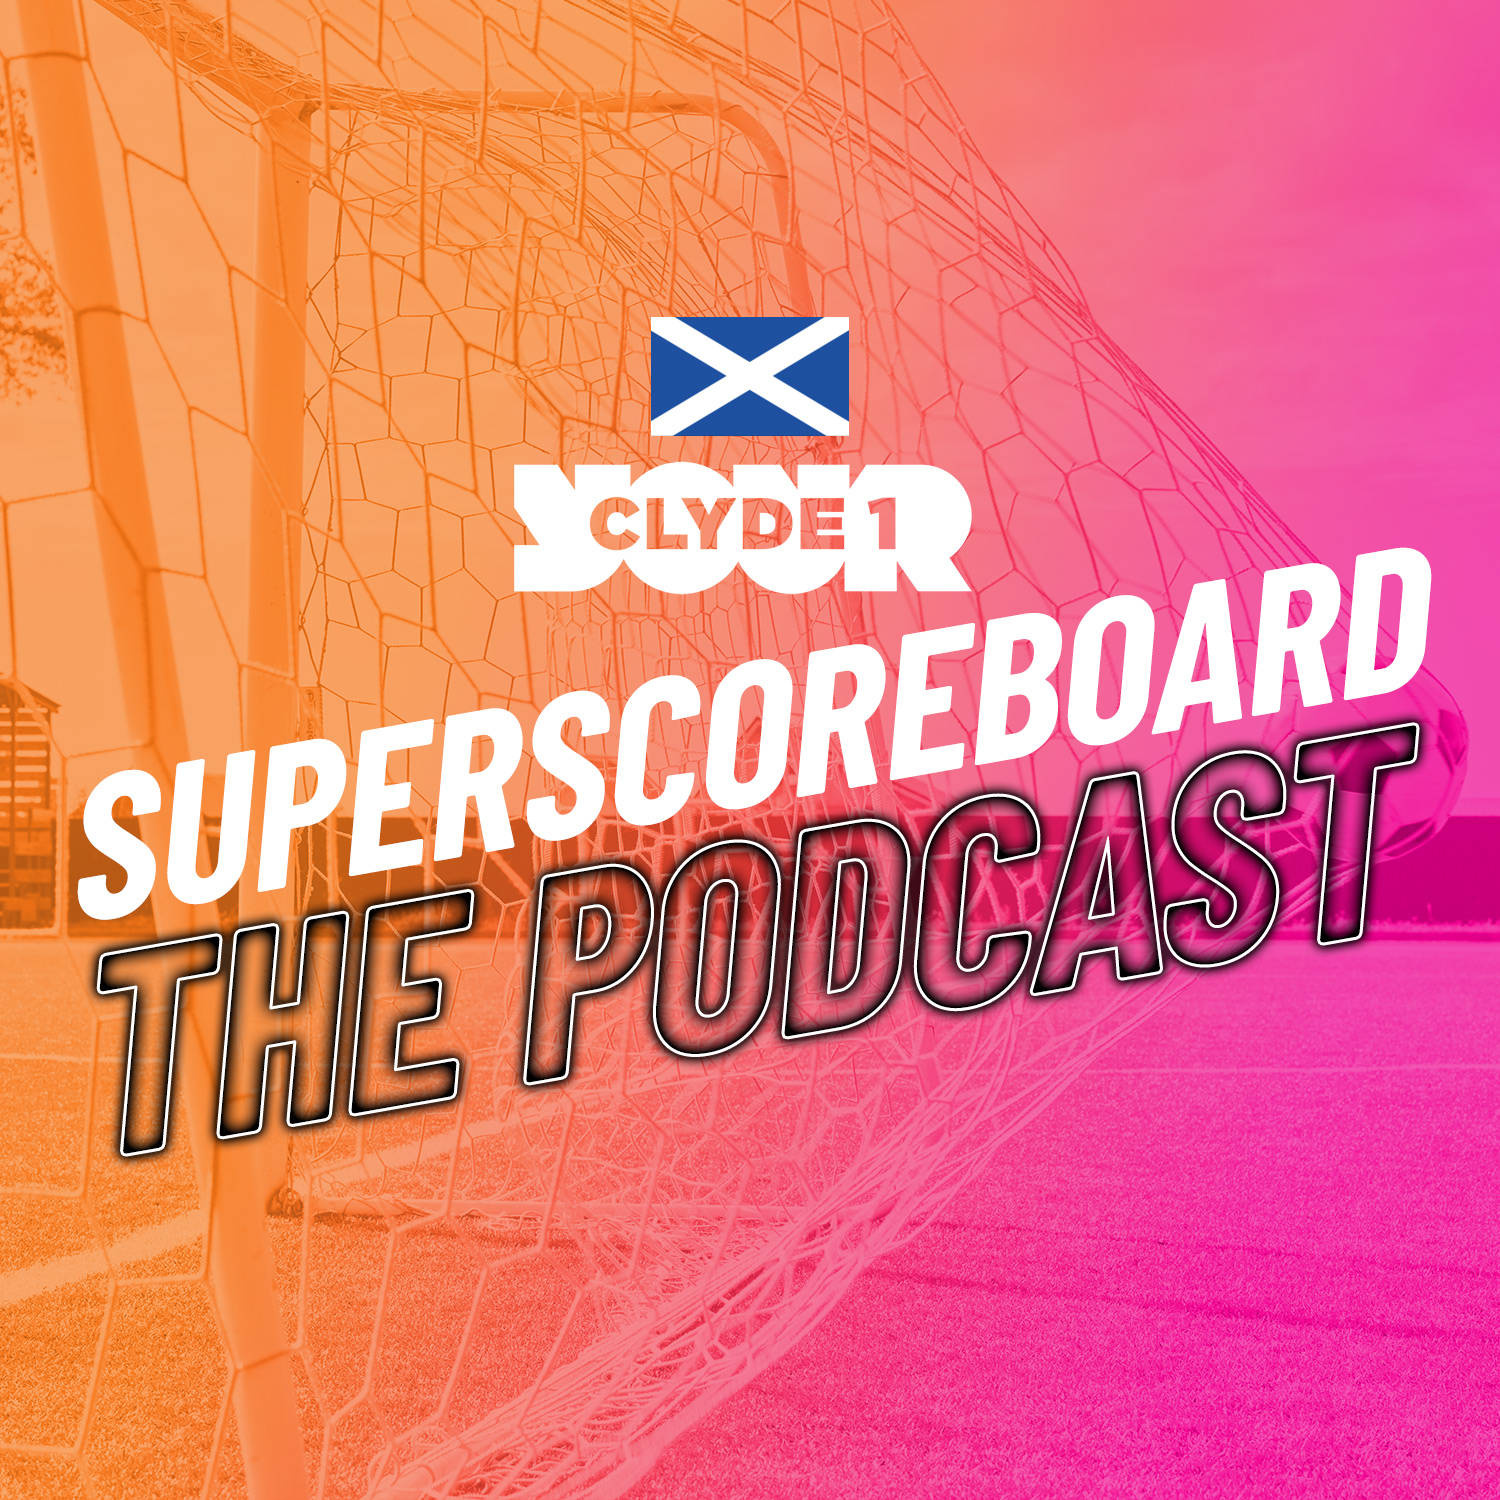 Monday 26th February Clyde 1 Superscoreboard